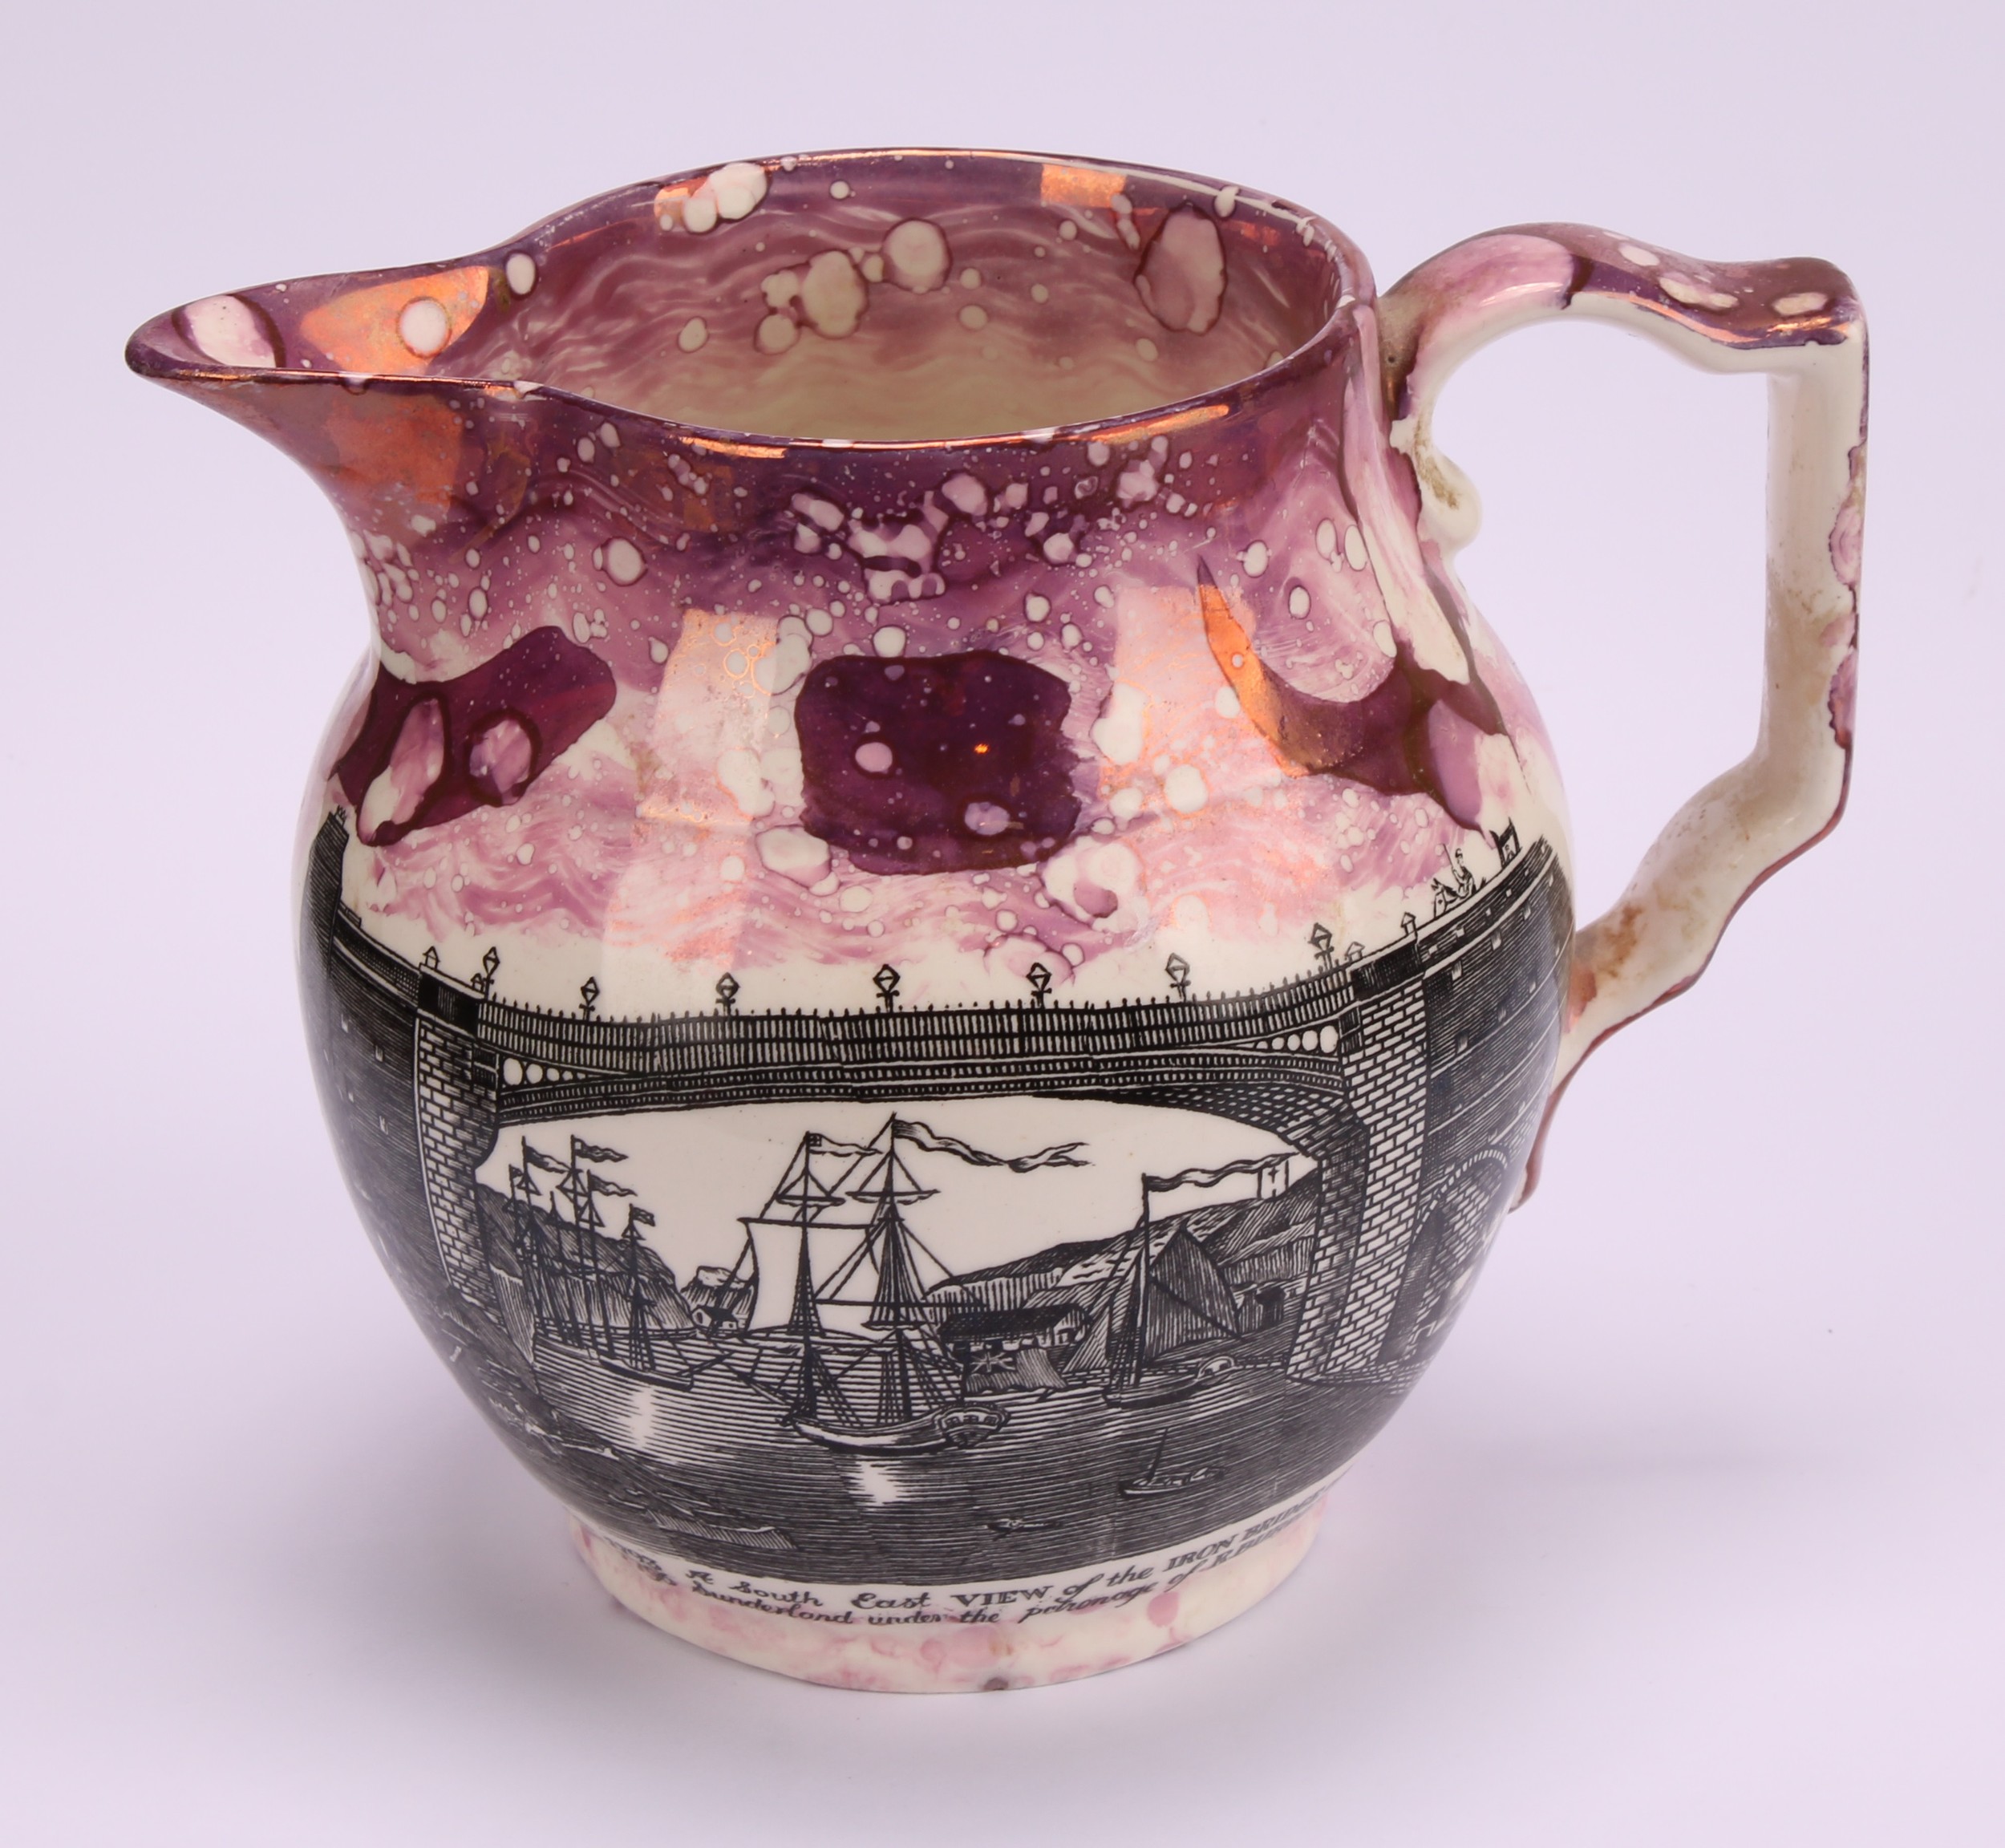 A Gray's Pottery Sunderland lustre type jug, printed with the Sunderland Iron Bridge over the - Image 3 of 9